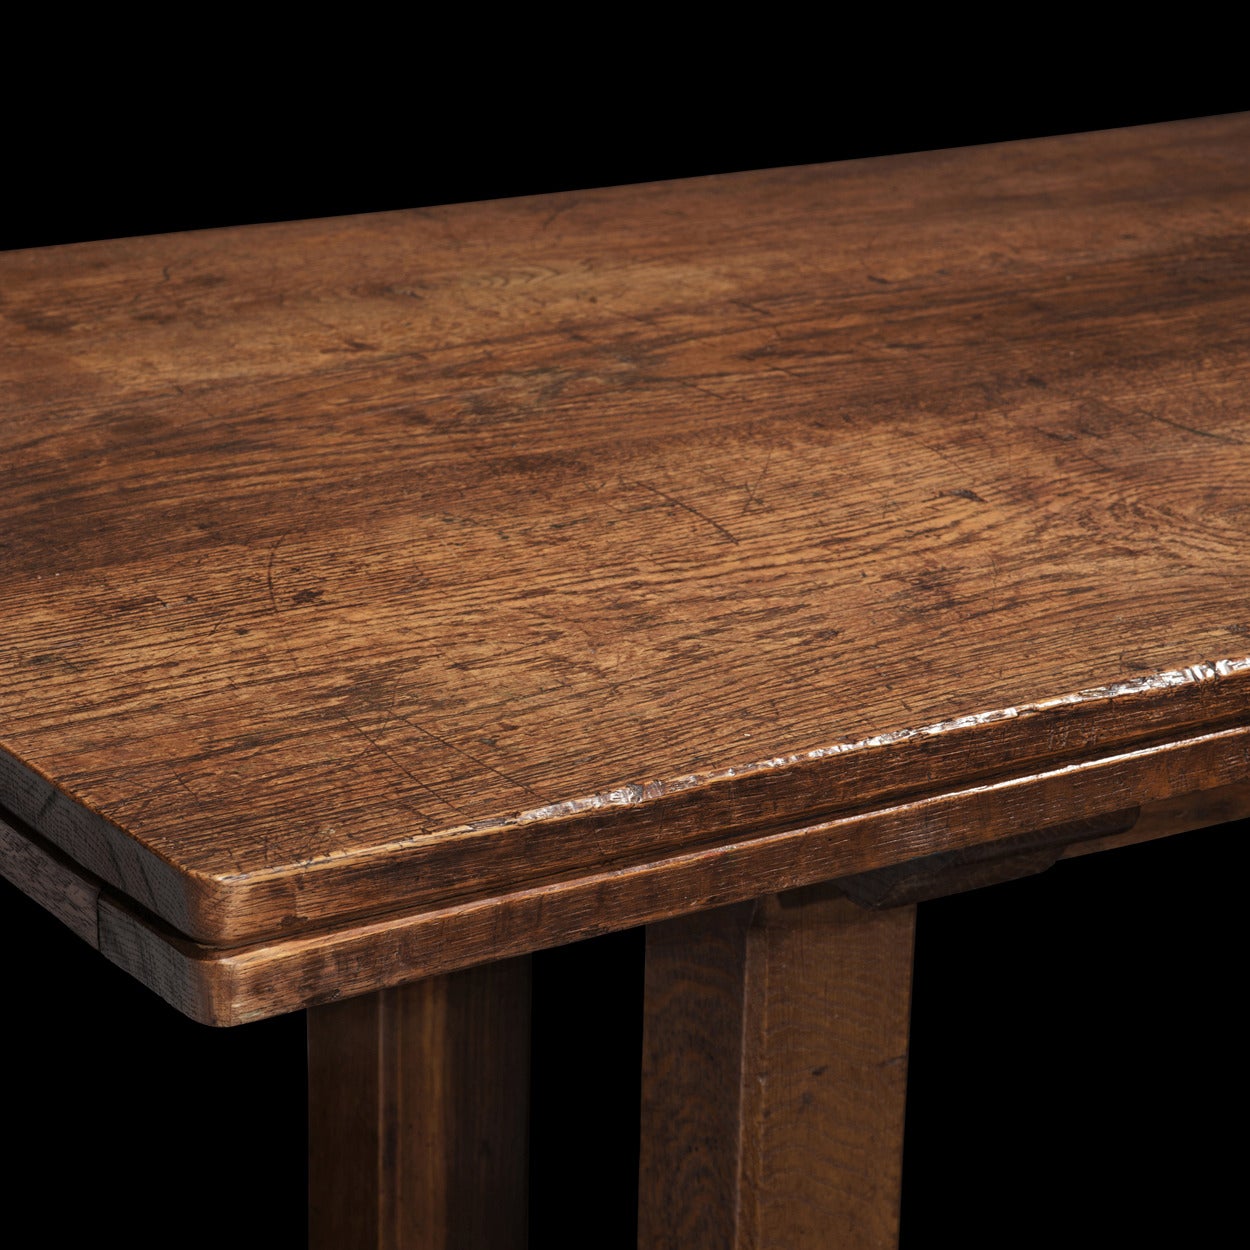 Early 20th Century Arts and Crafts Oak Refectory Table